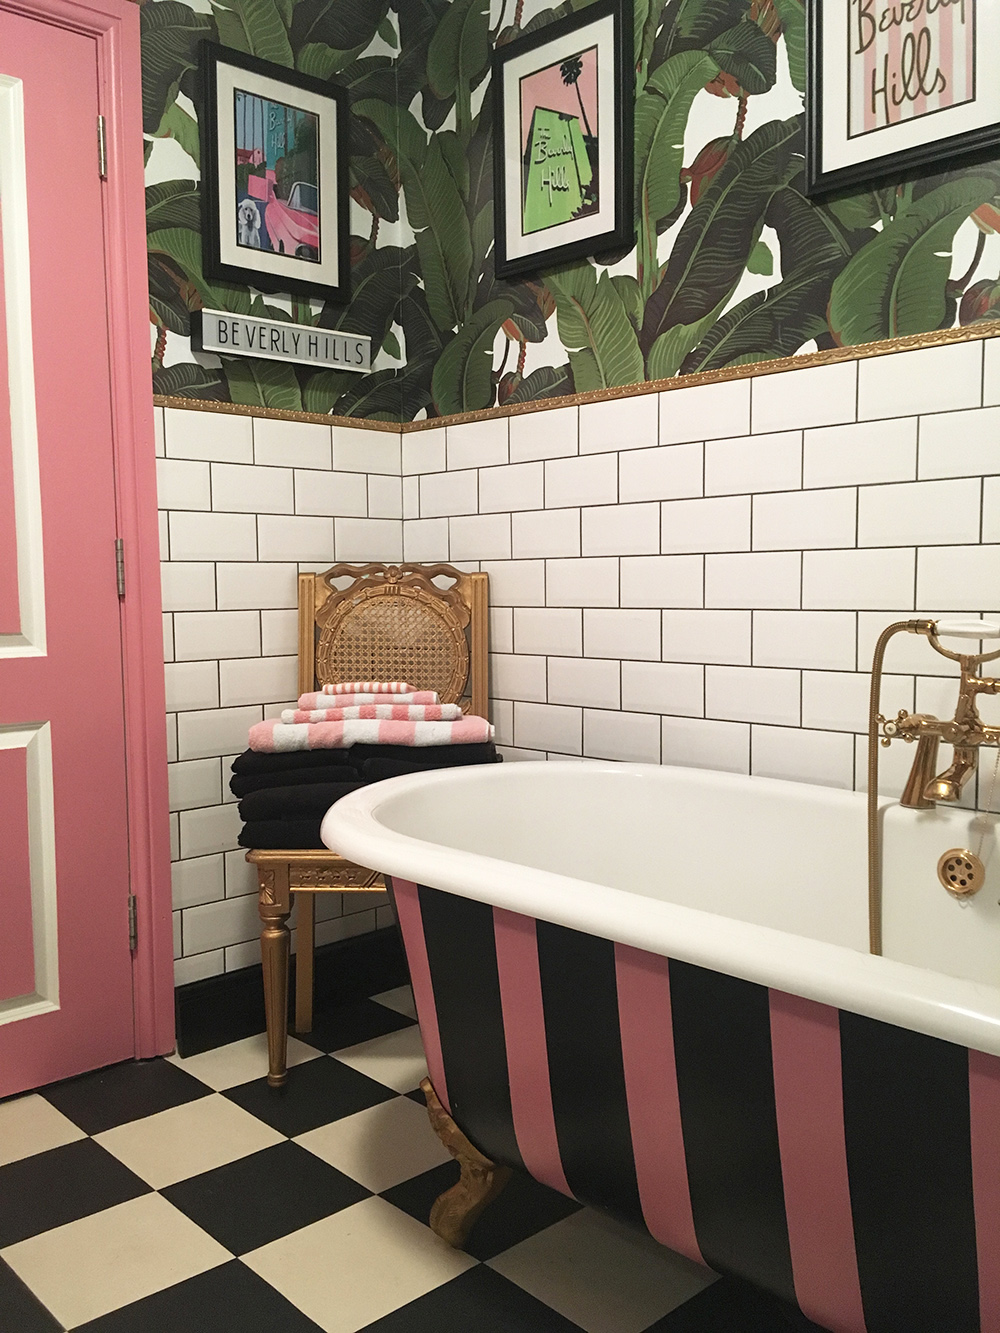 House tour- opulent and eccentric décor. Tropical banana leaf wallpaper in the bathroom with pink accents.